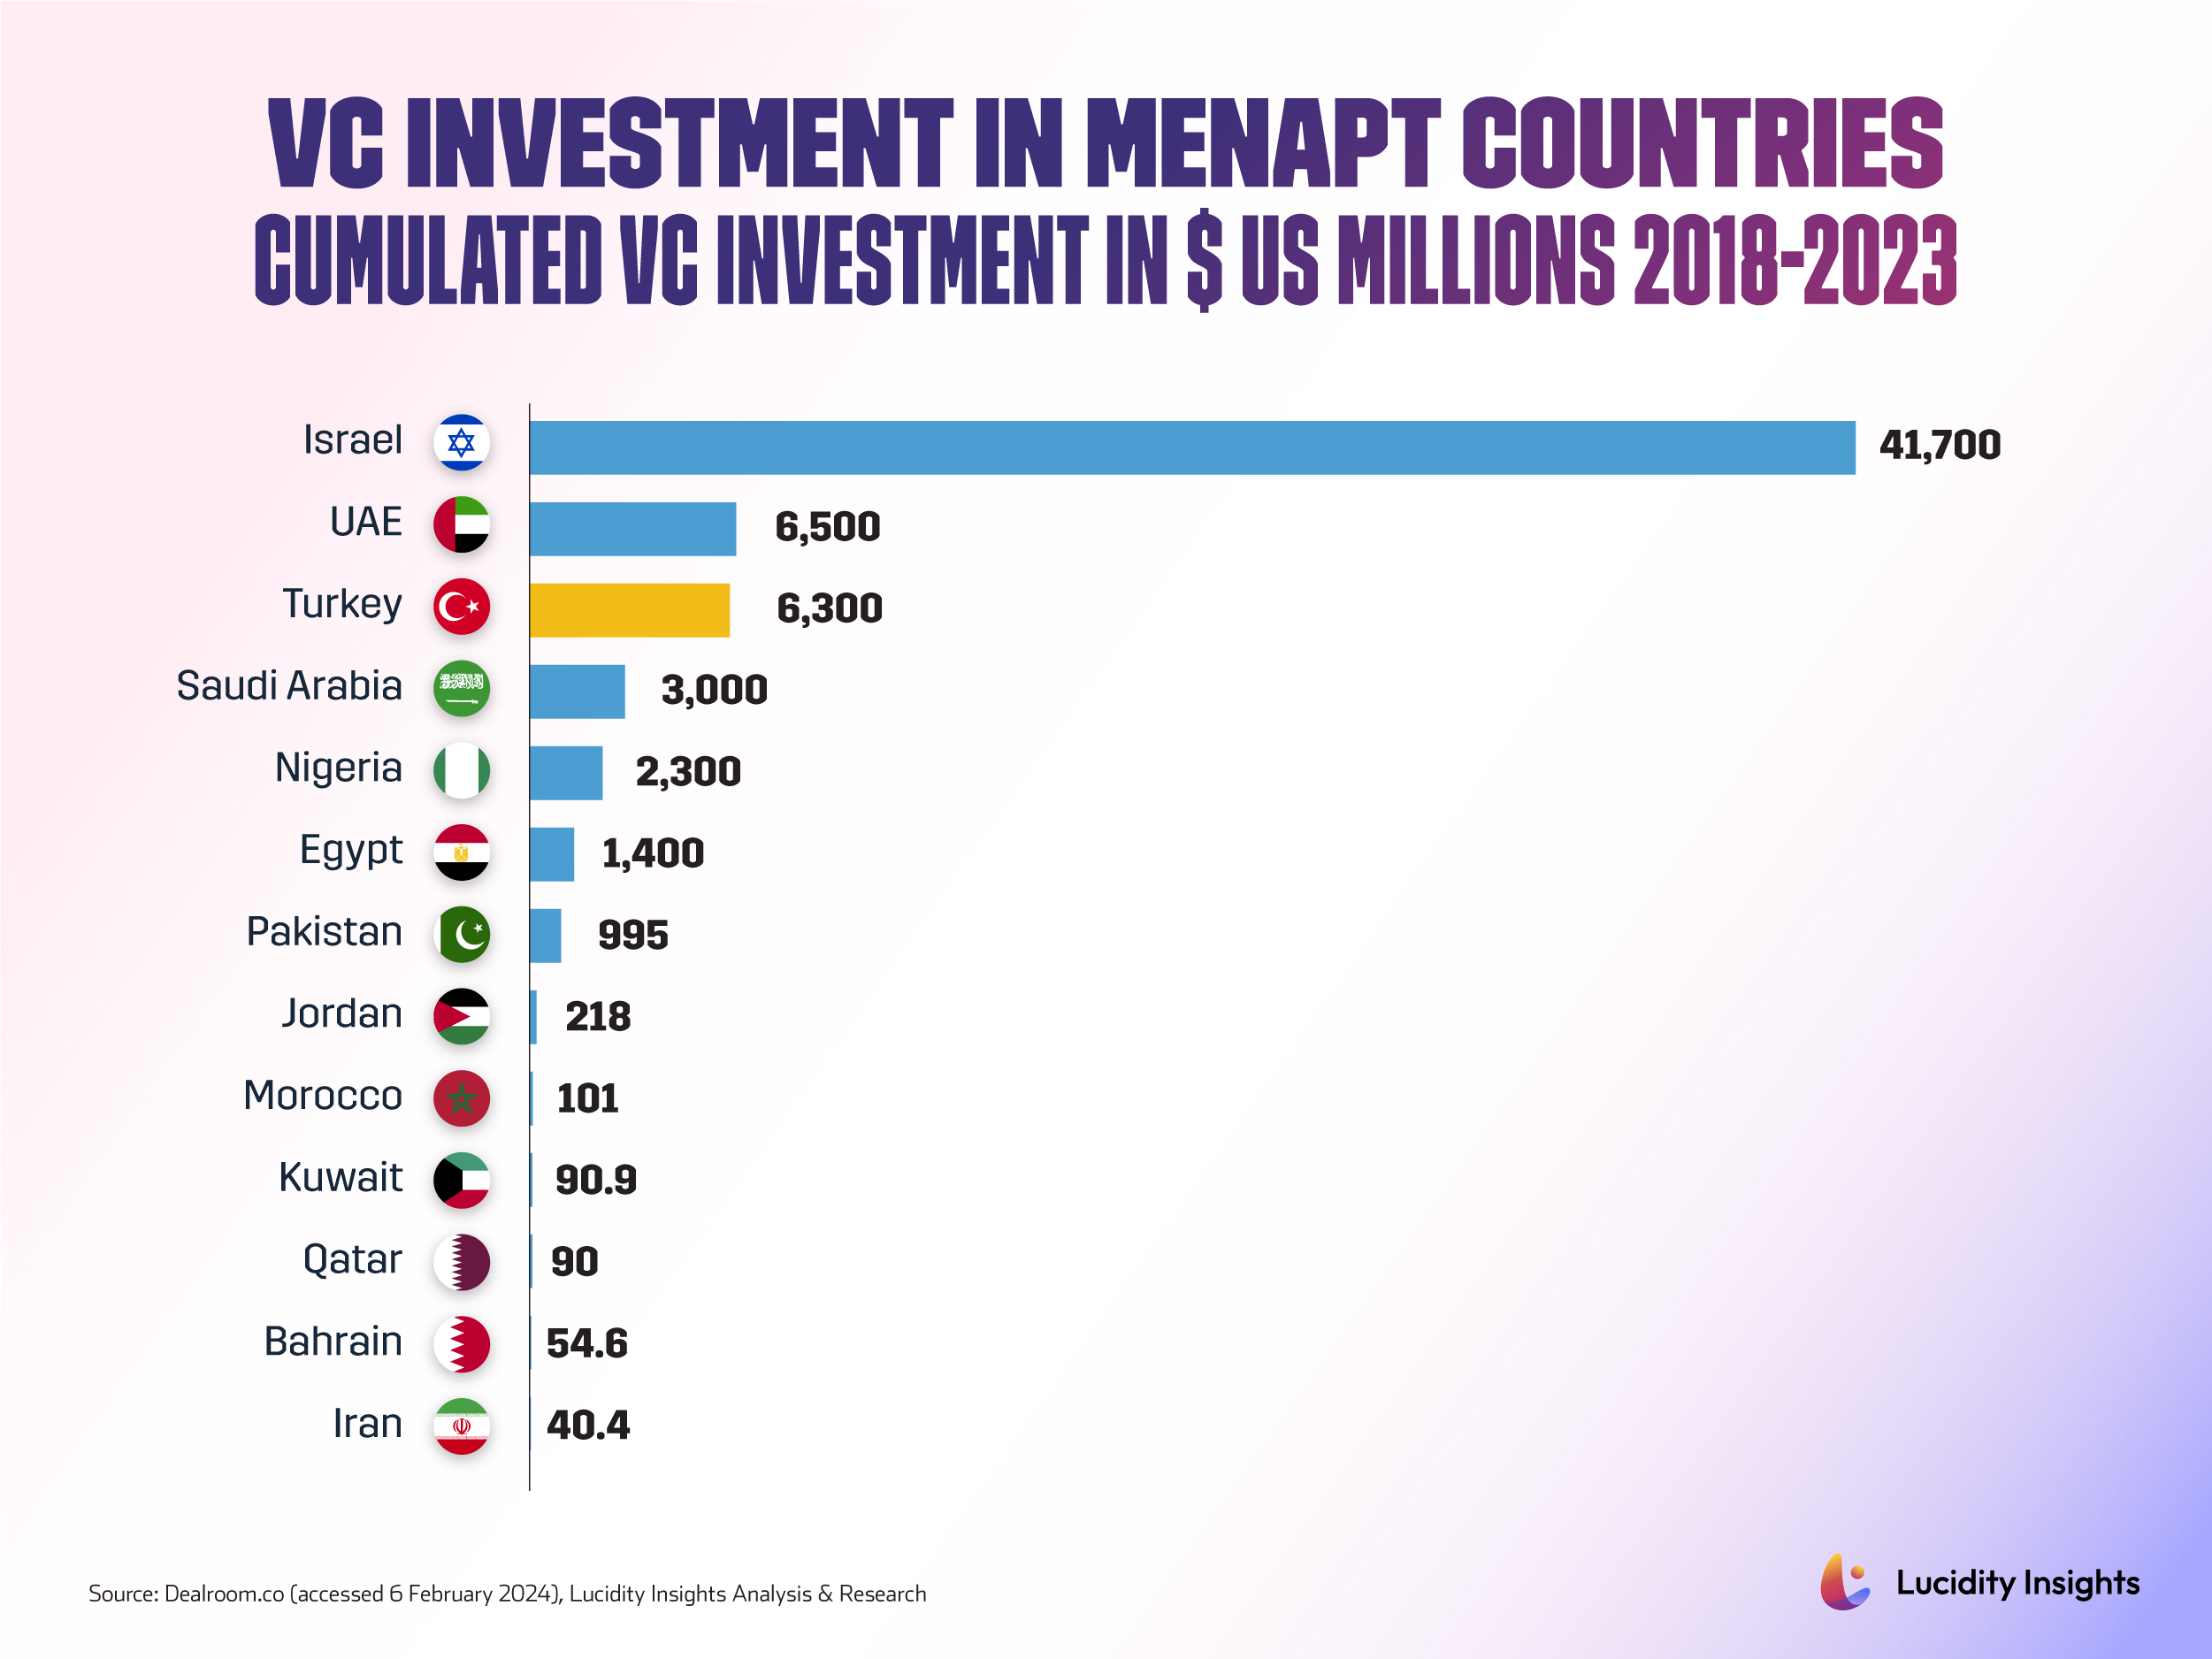 VC Investment in MENAPT Countries 2018-2023